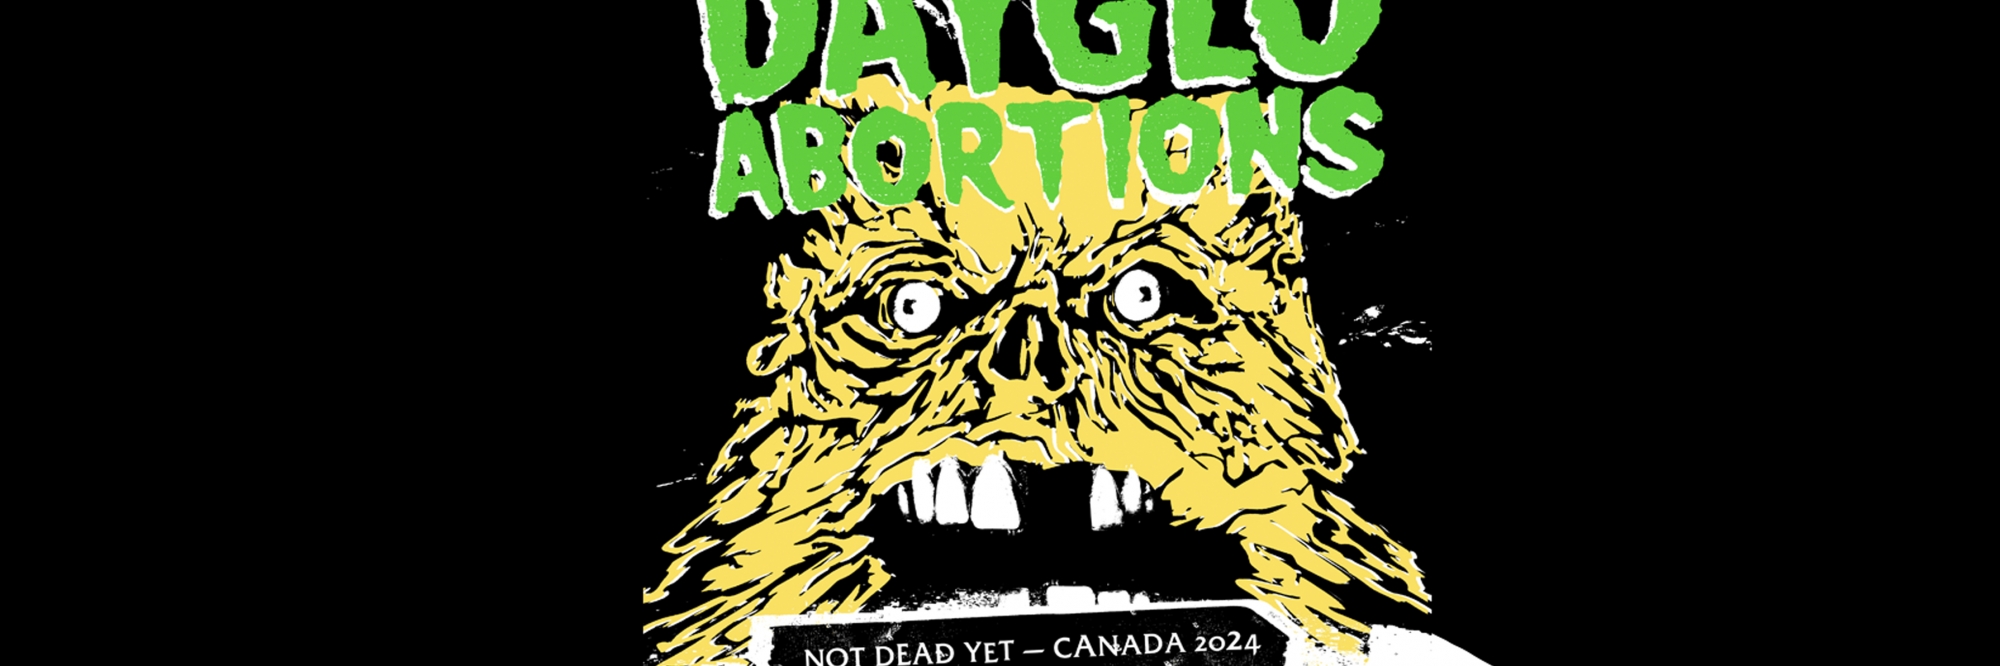 Dayglo Abortions - Friday, May 24